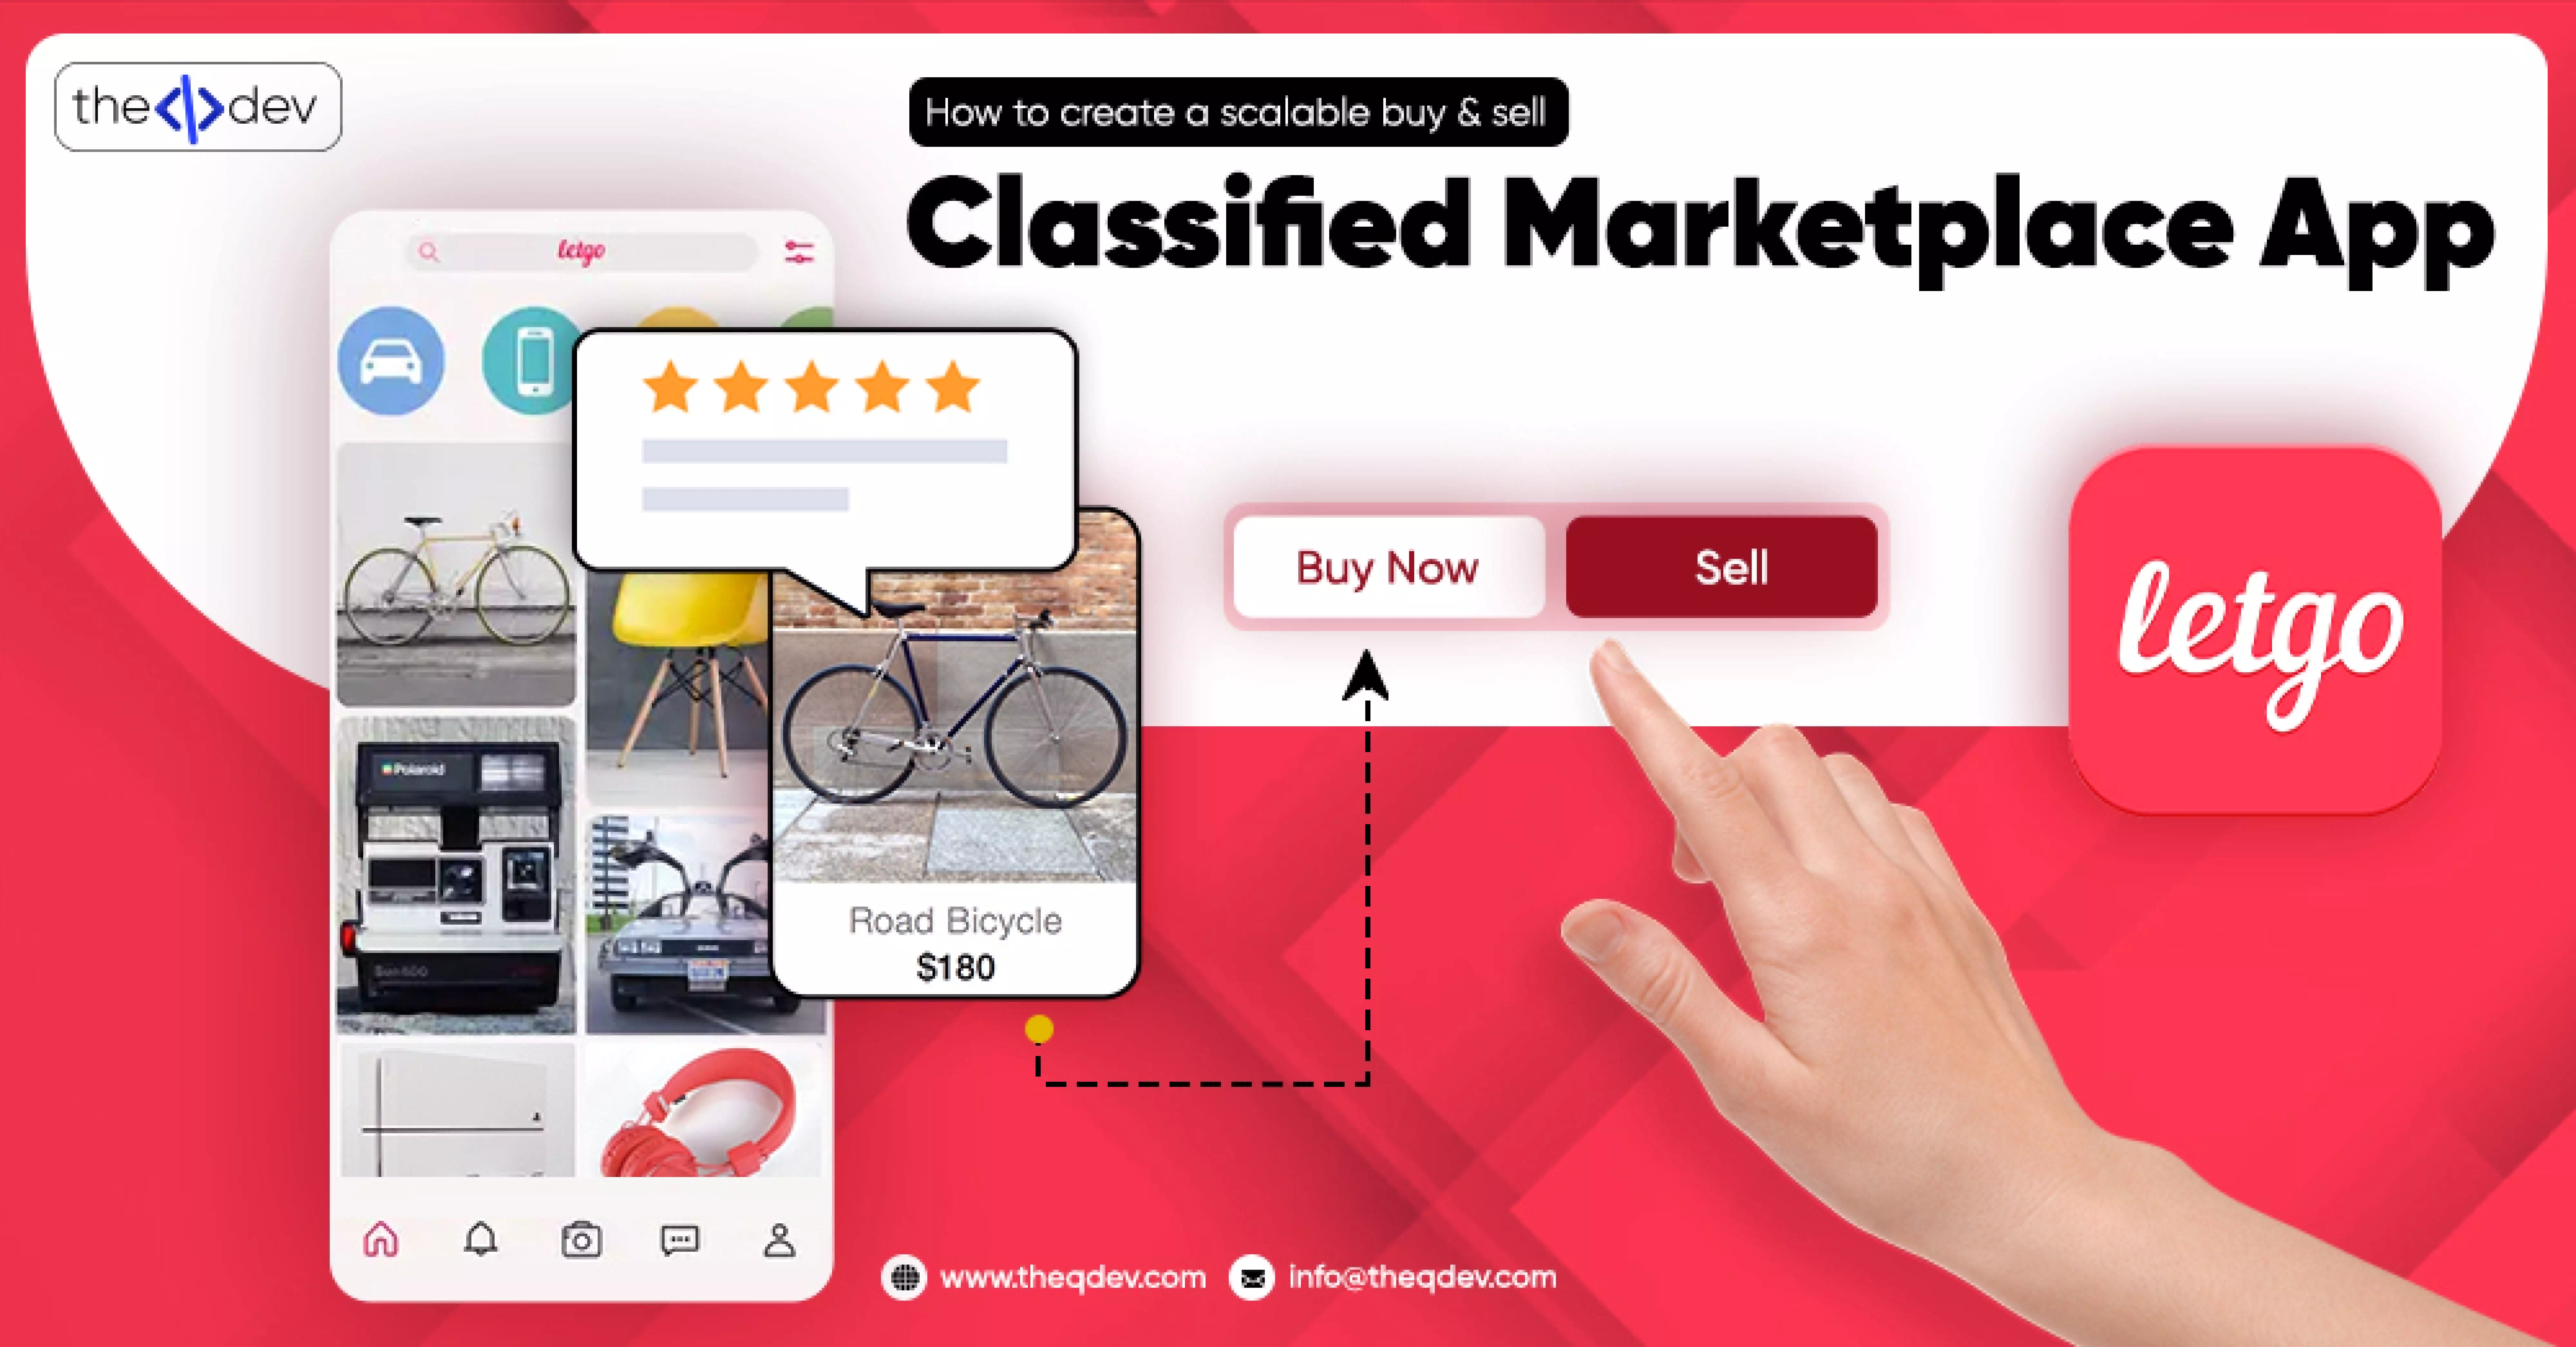 How to create a scalable buy & sell classified marketplace App like Letgo